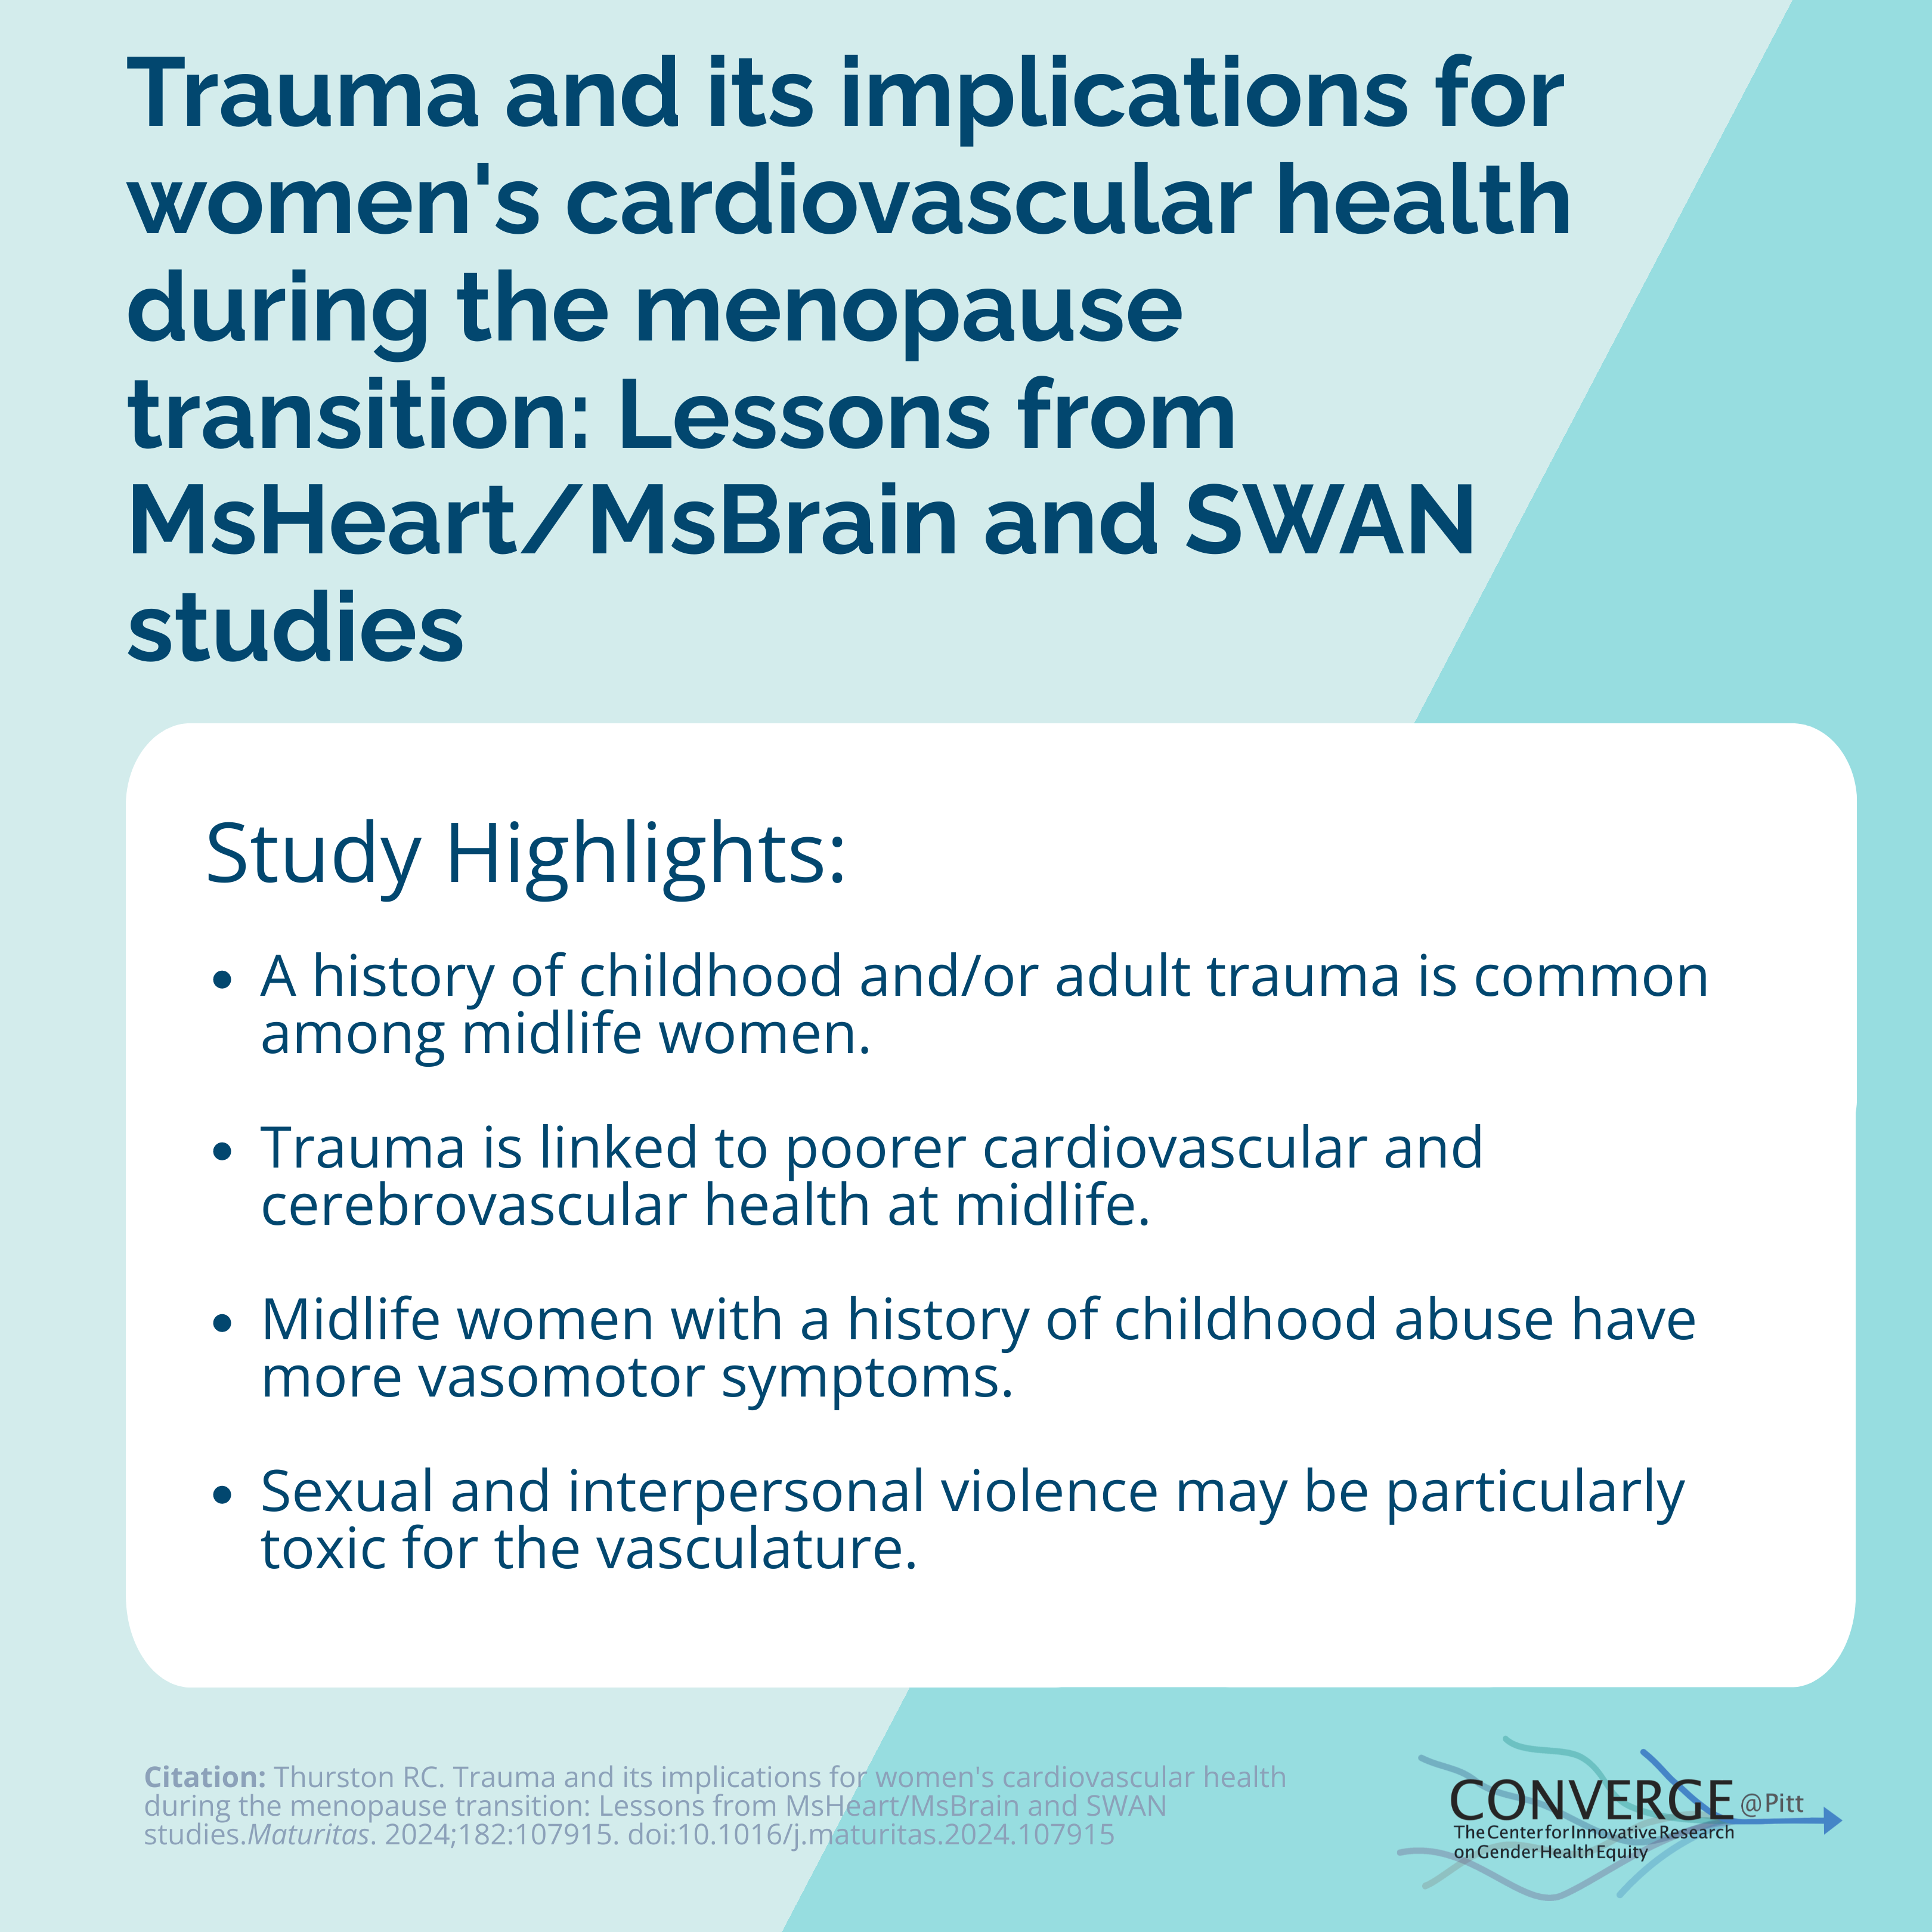 Trauma and its implications for women's cardiovascular health during the menopause transition: Lessons from MsHeart/MsBrain and SWAN studies